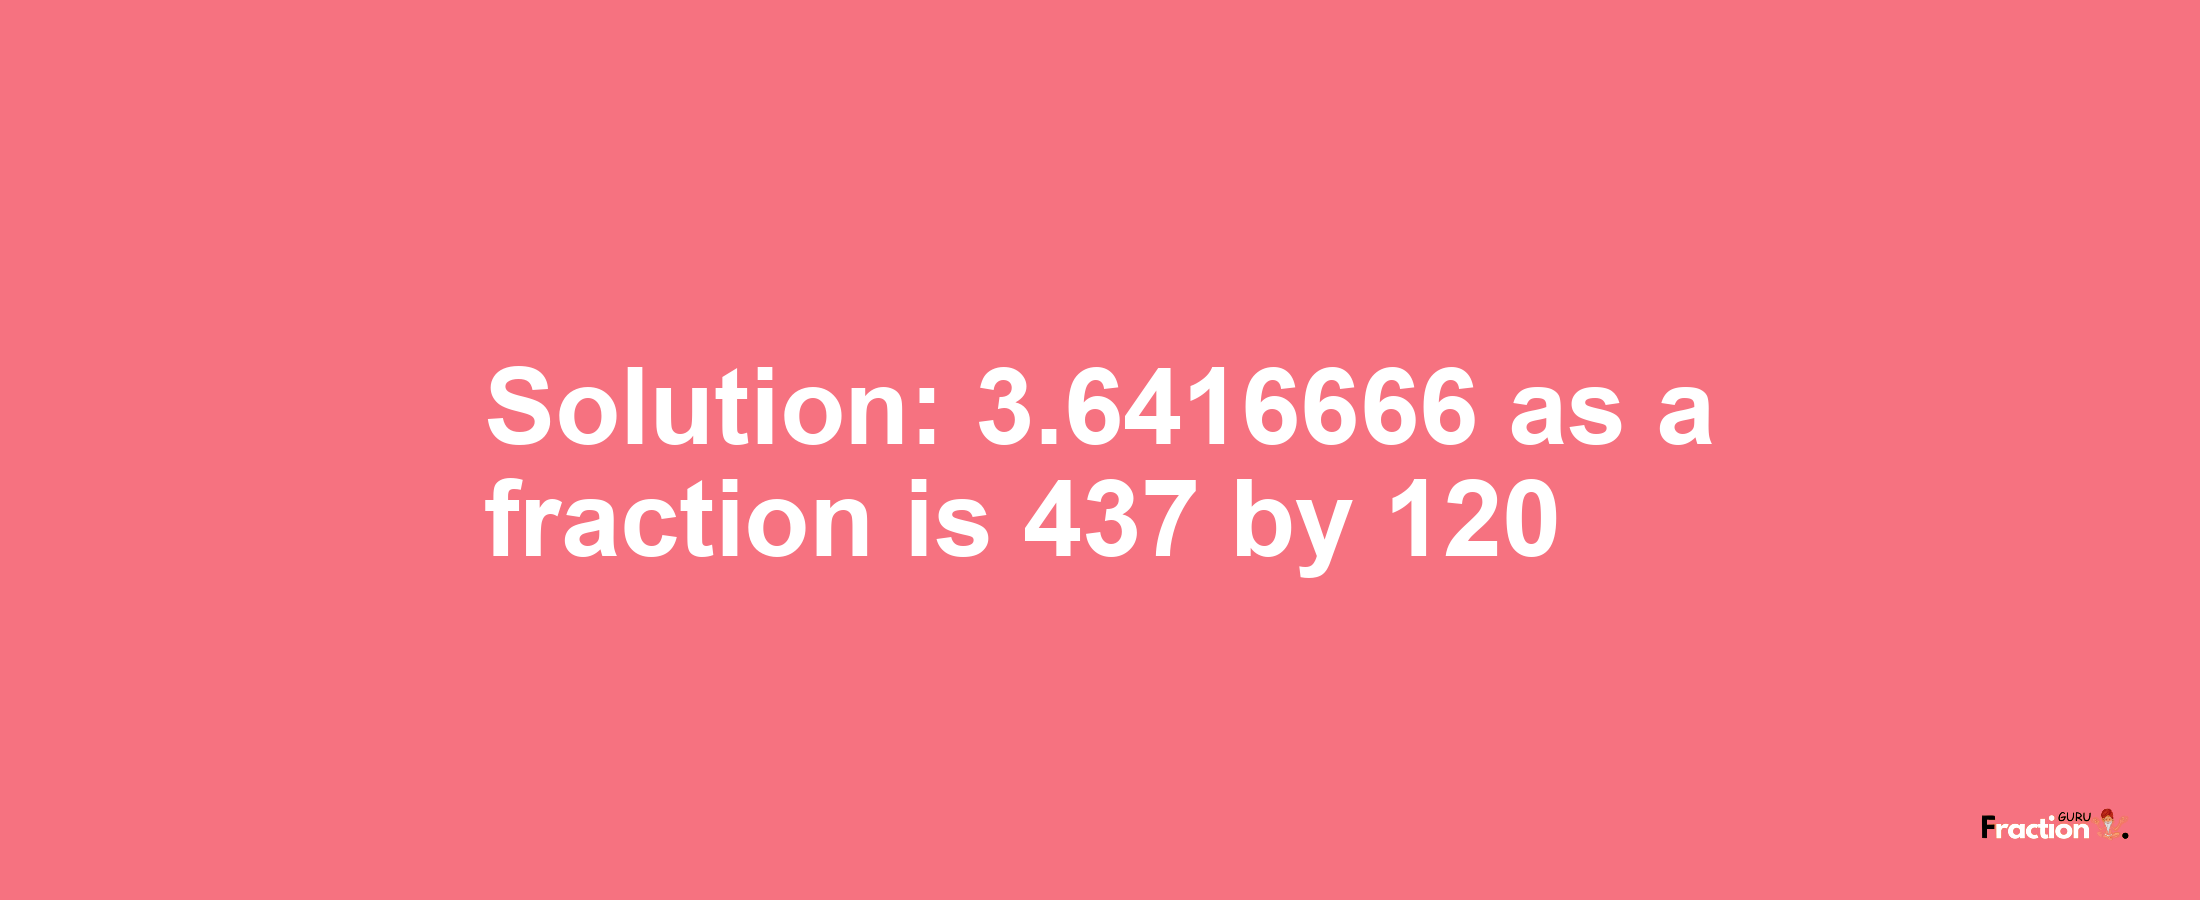 Solution:3.6416666 as a fraction is 437/120